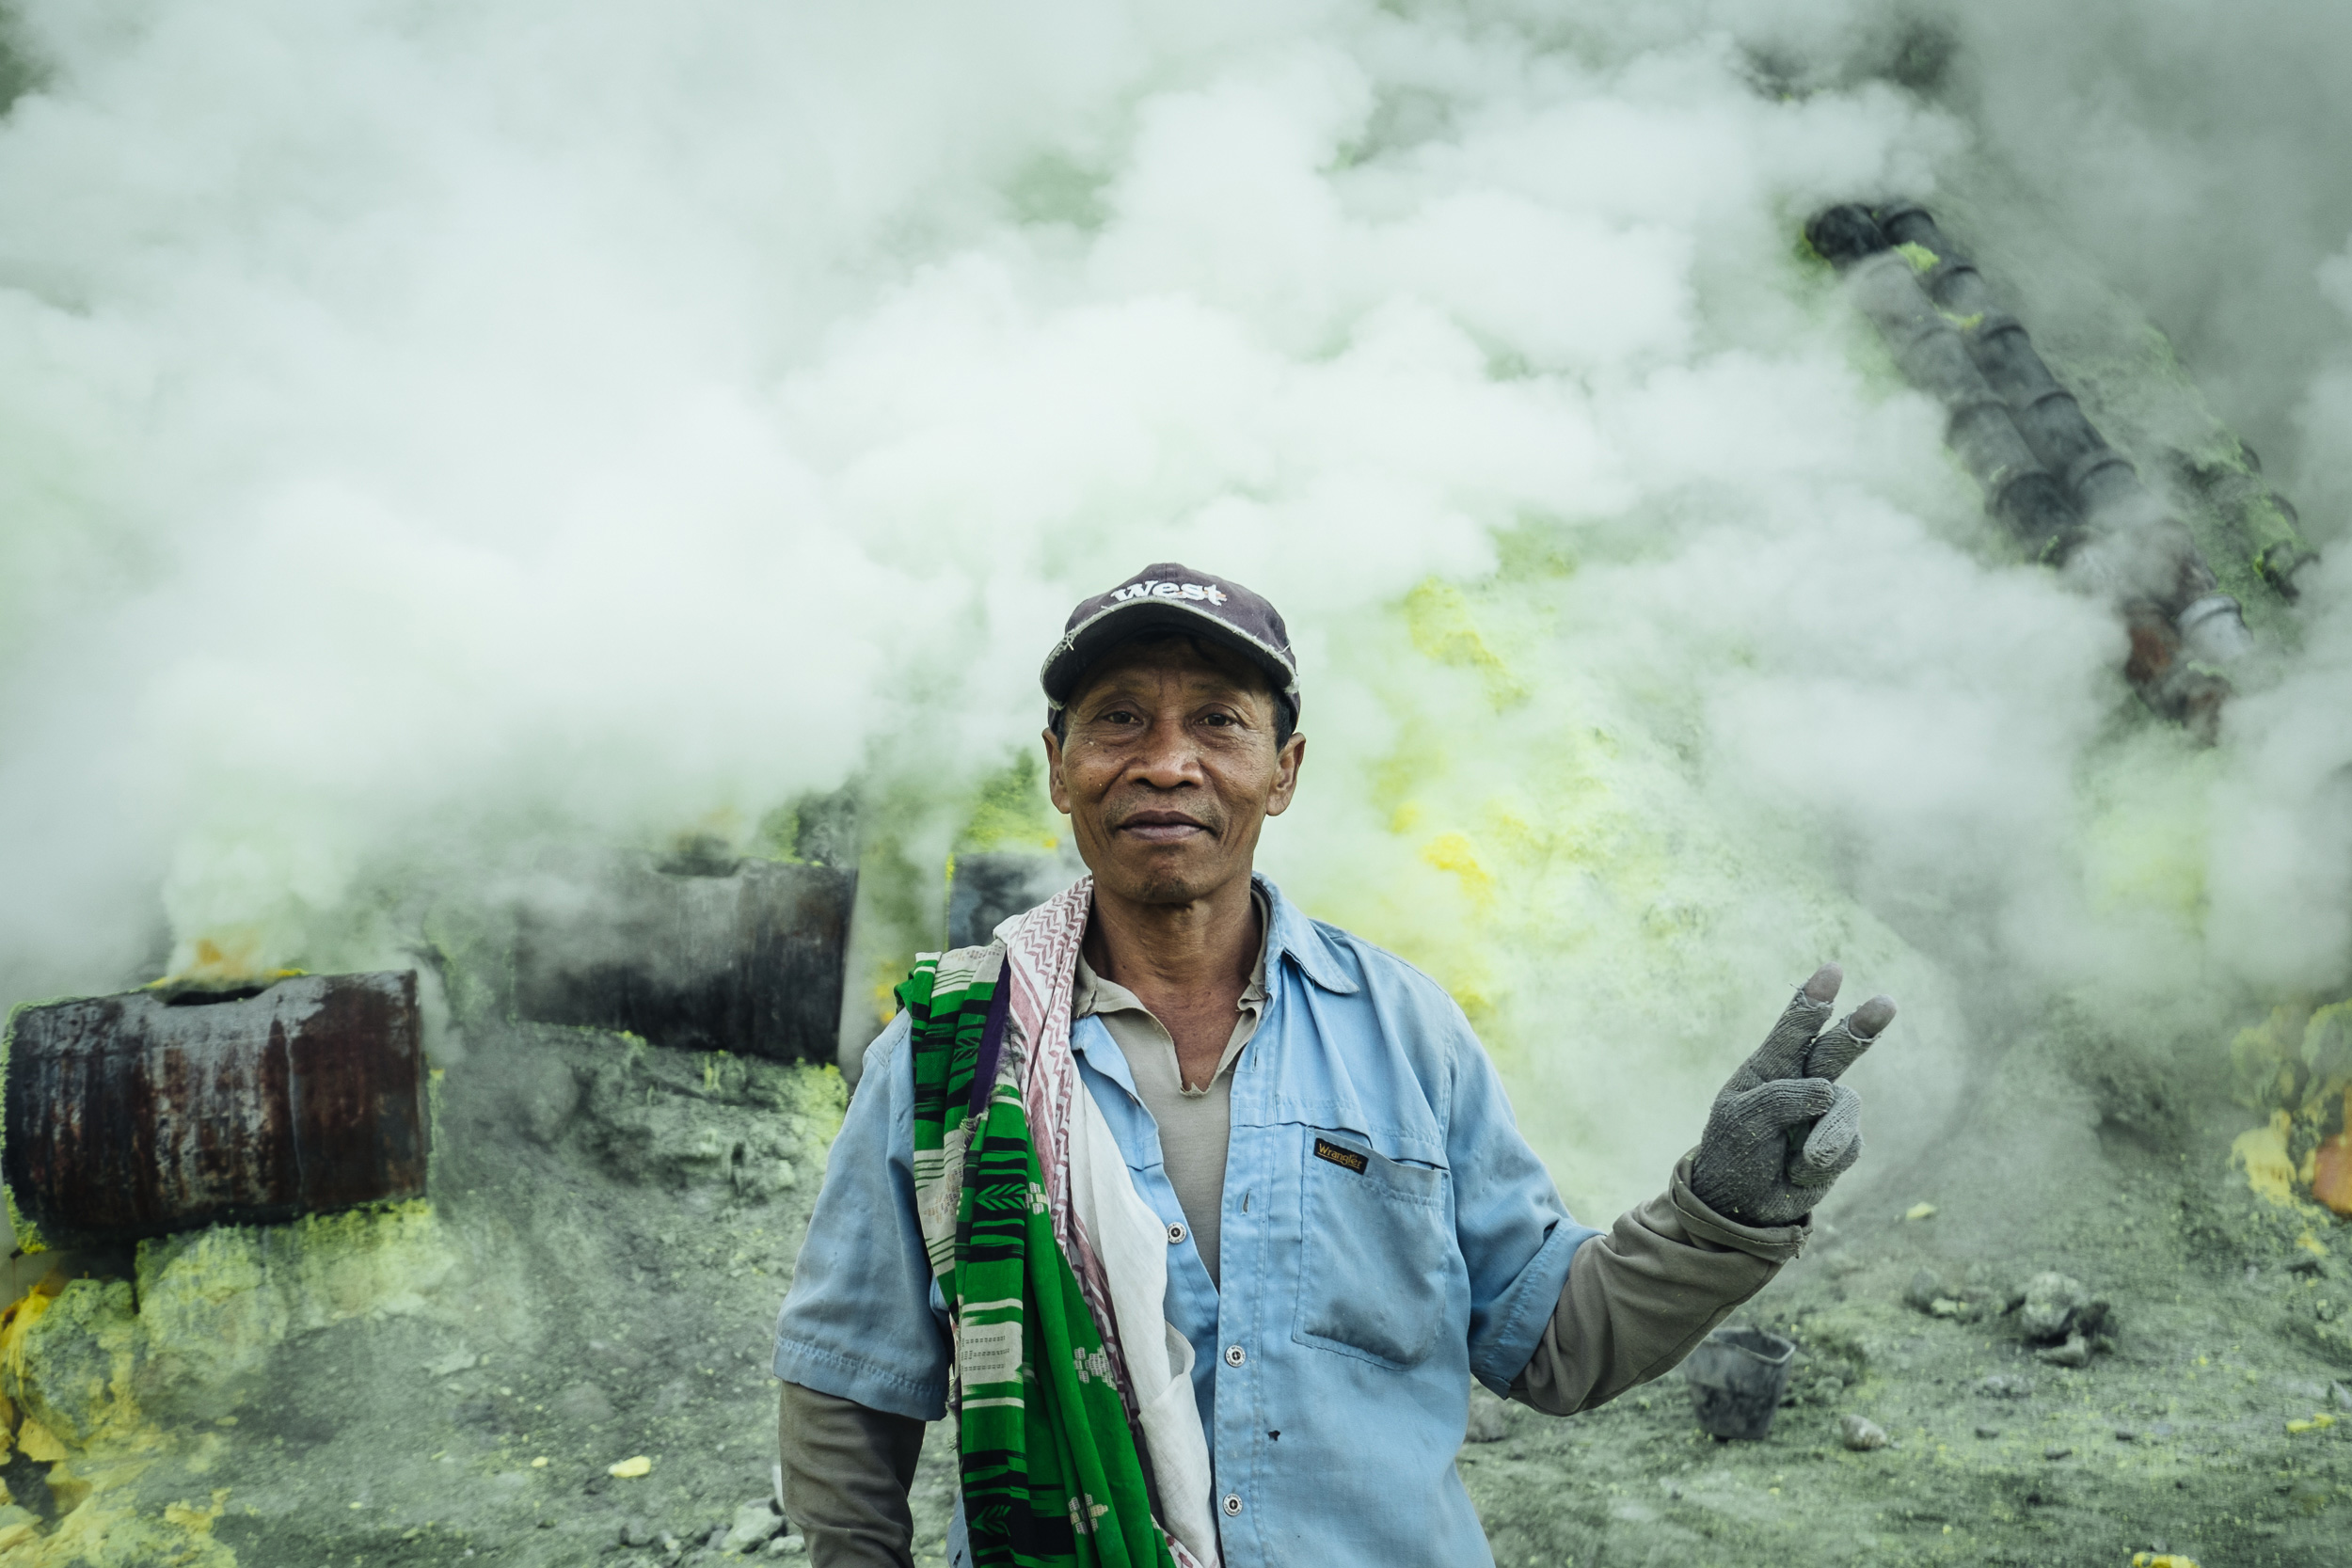 Each day the miners from surrounding areas make the perilous journey up to the rim of East Java's Ijen volcano before descending into the depths of one of the most poisonous places on the planet. Here lies one the world's largest sulphur mines.